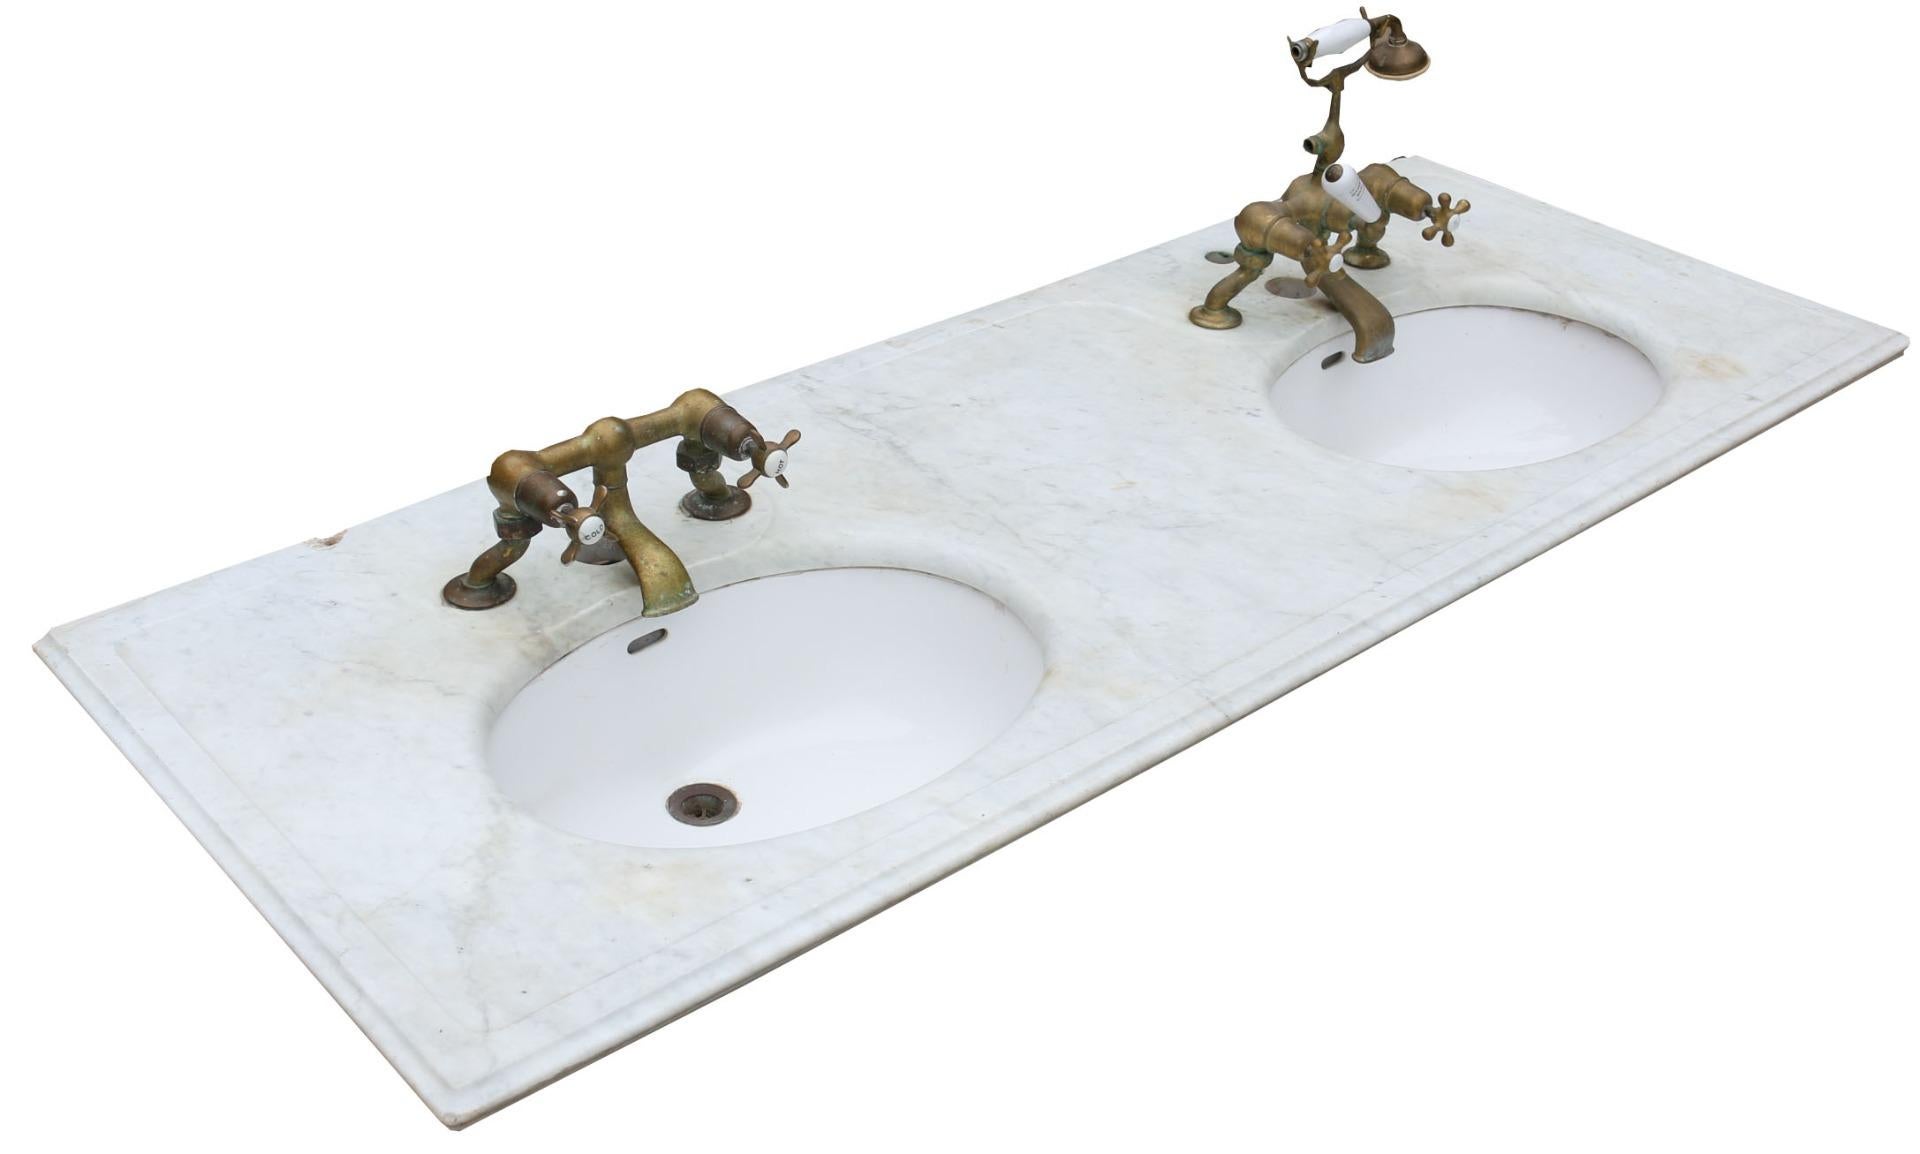 This beautiful double basin is made from a white and grey veined Carrara marble with brass taps and ceramic under-mounted basins.
There are no breaks or cracks.

Taps on the left basin both turn freely.

Taps on the right basin. Left feels seized,